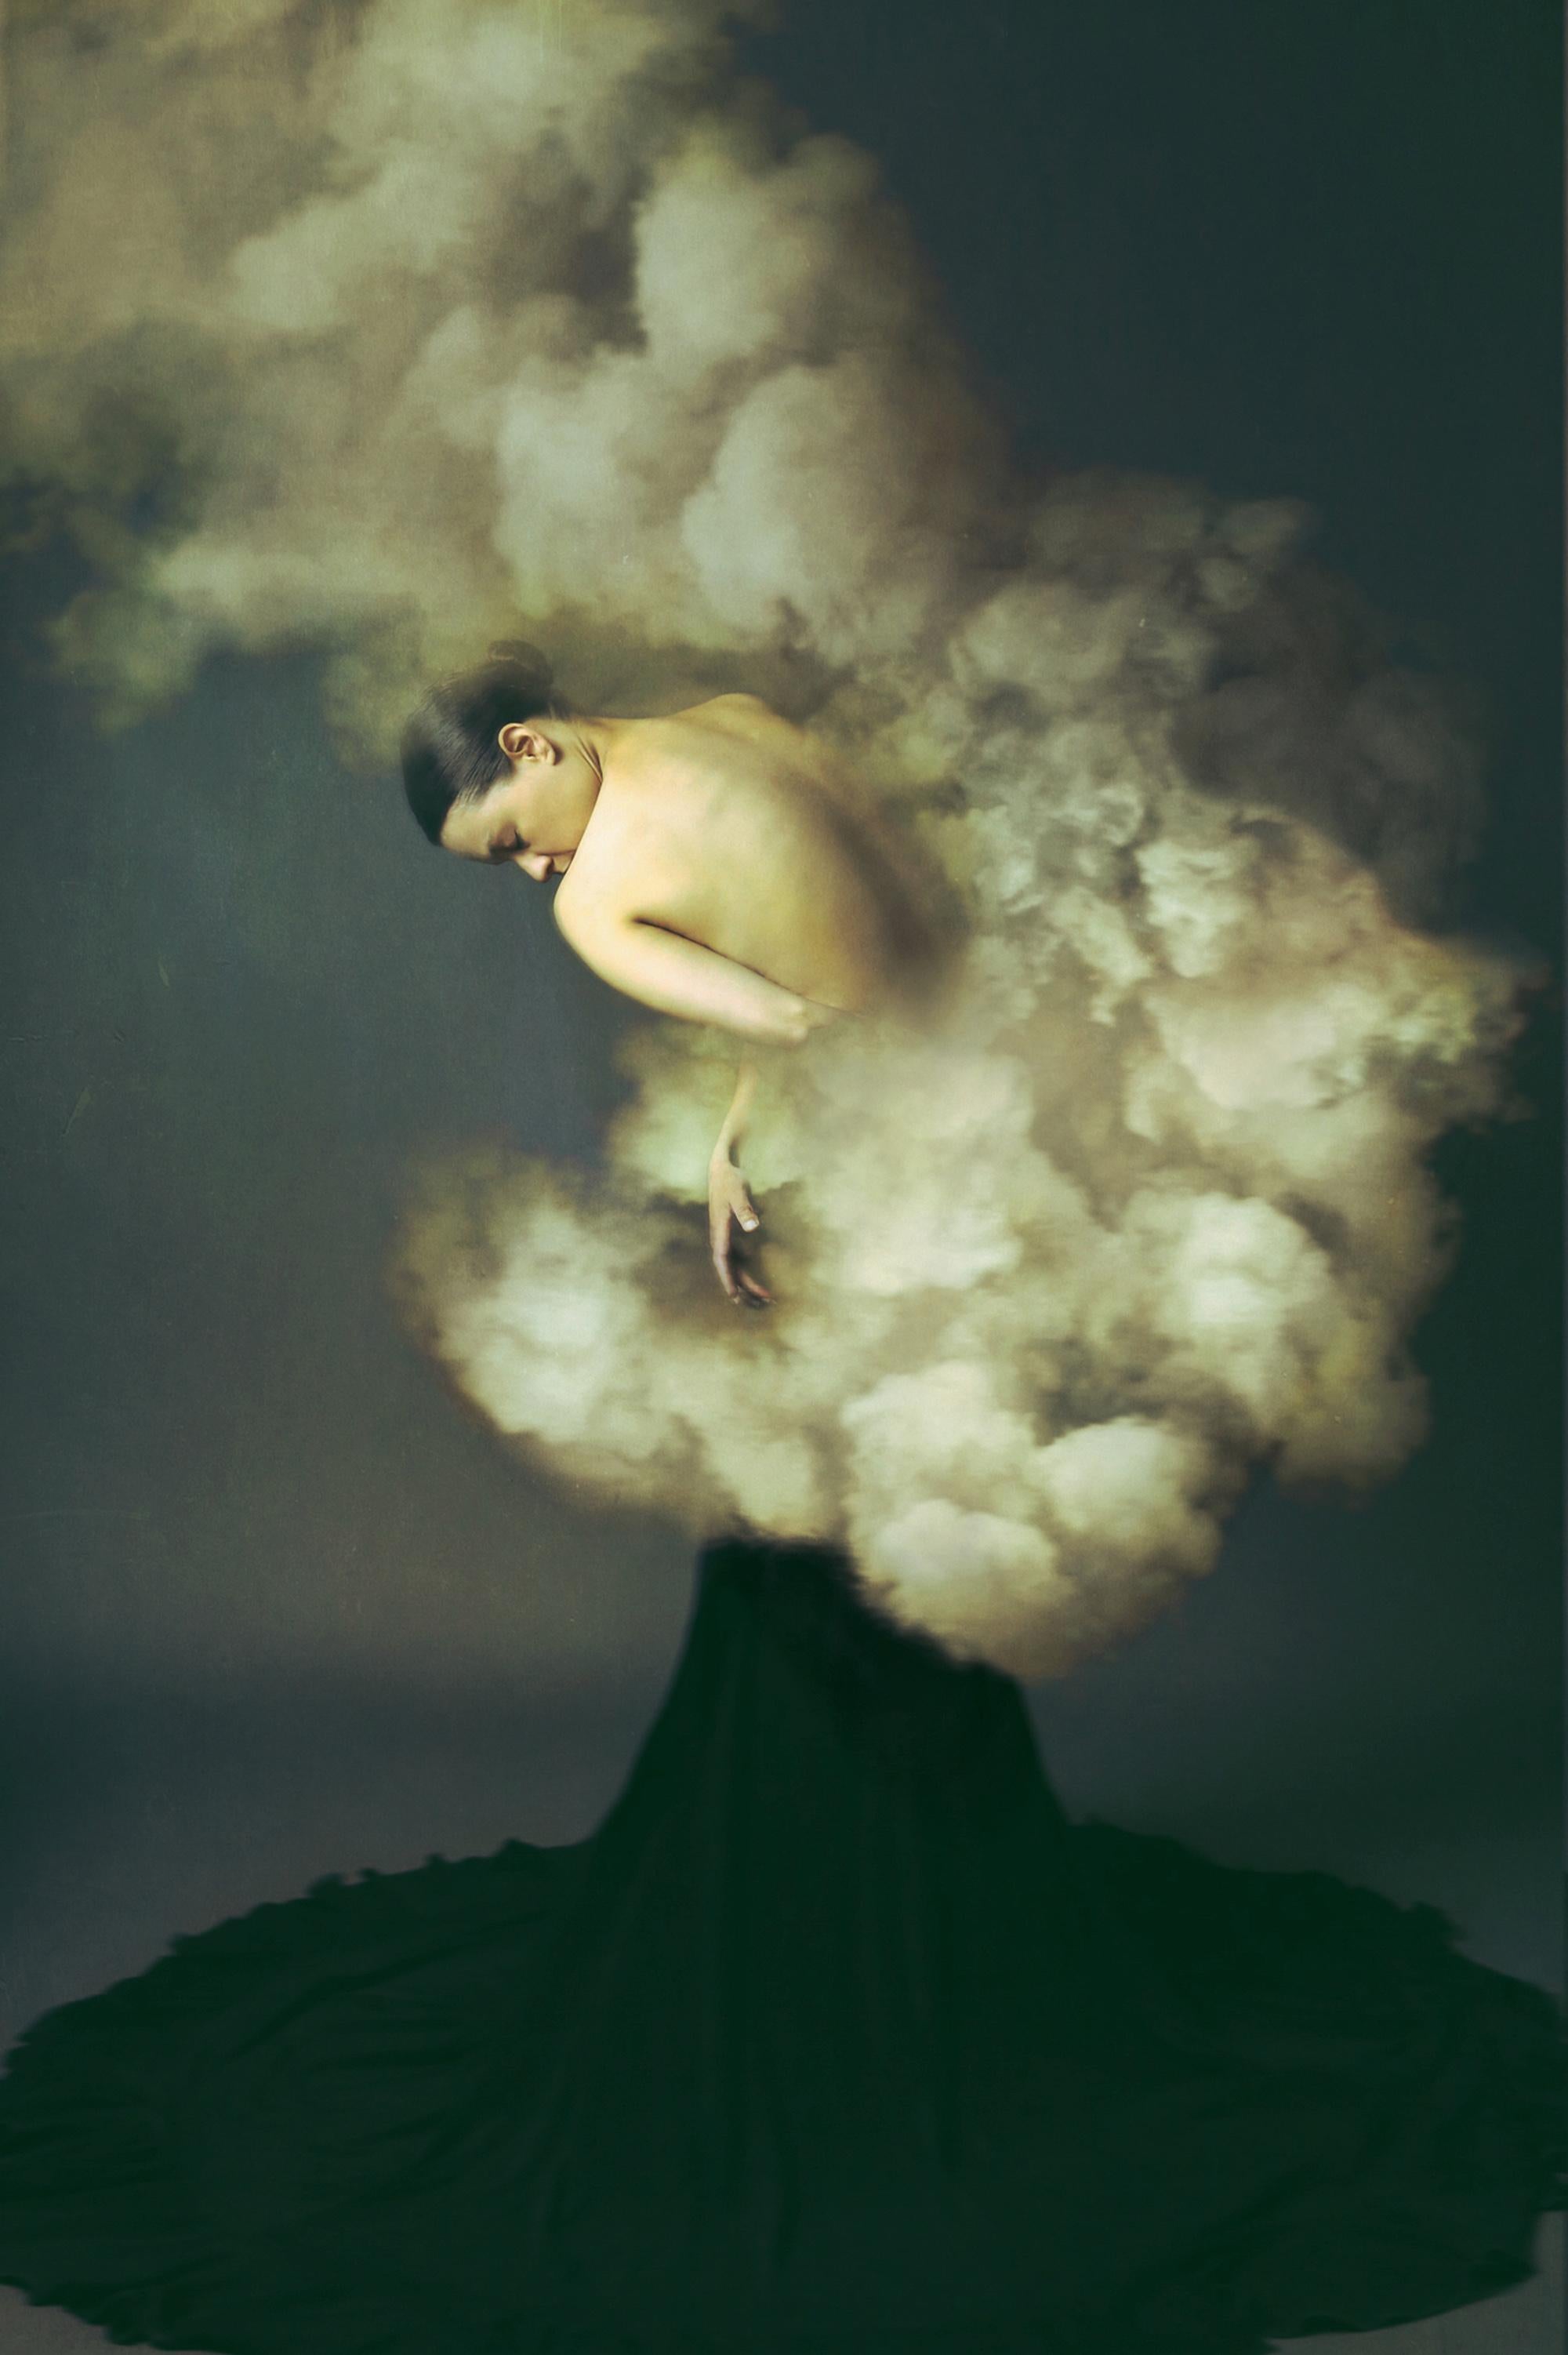 Artist: Josephine Cardin

Medium: Photography

Limited edition of 30
"Another conversation with no destination, another battle never won. Each side is a loser, so who cares who fired the gun - I'm learning so I'm leaving and even though I'm grieving